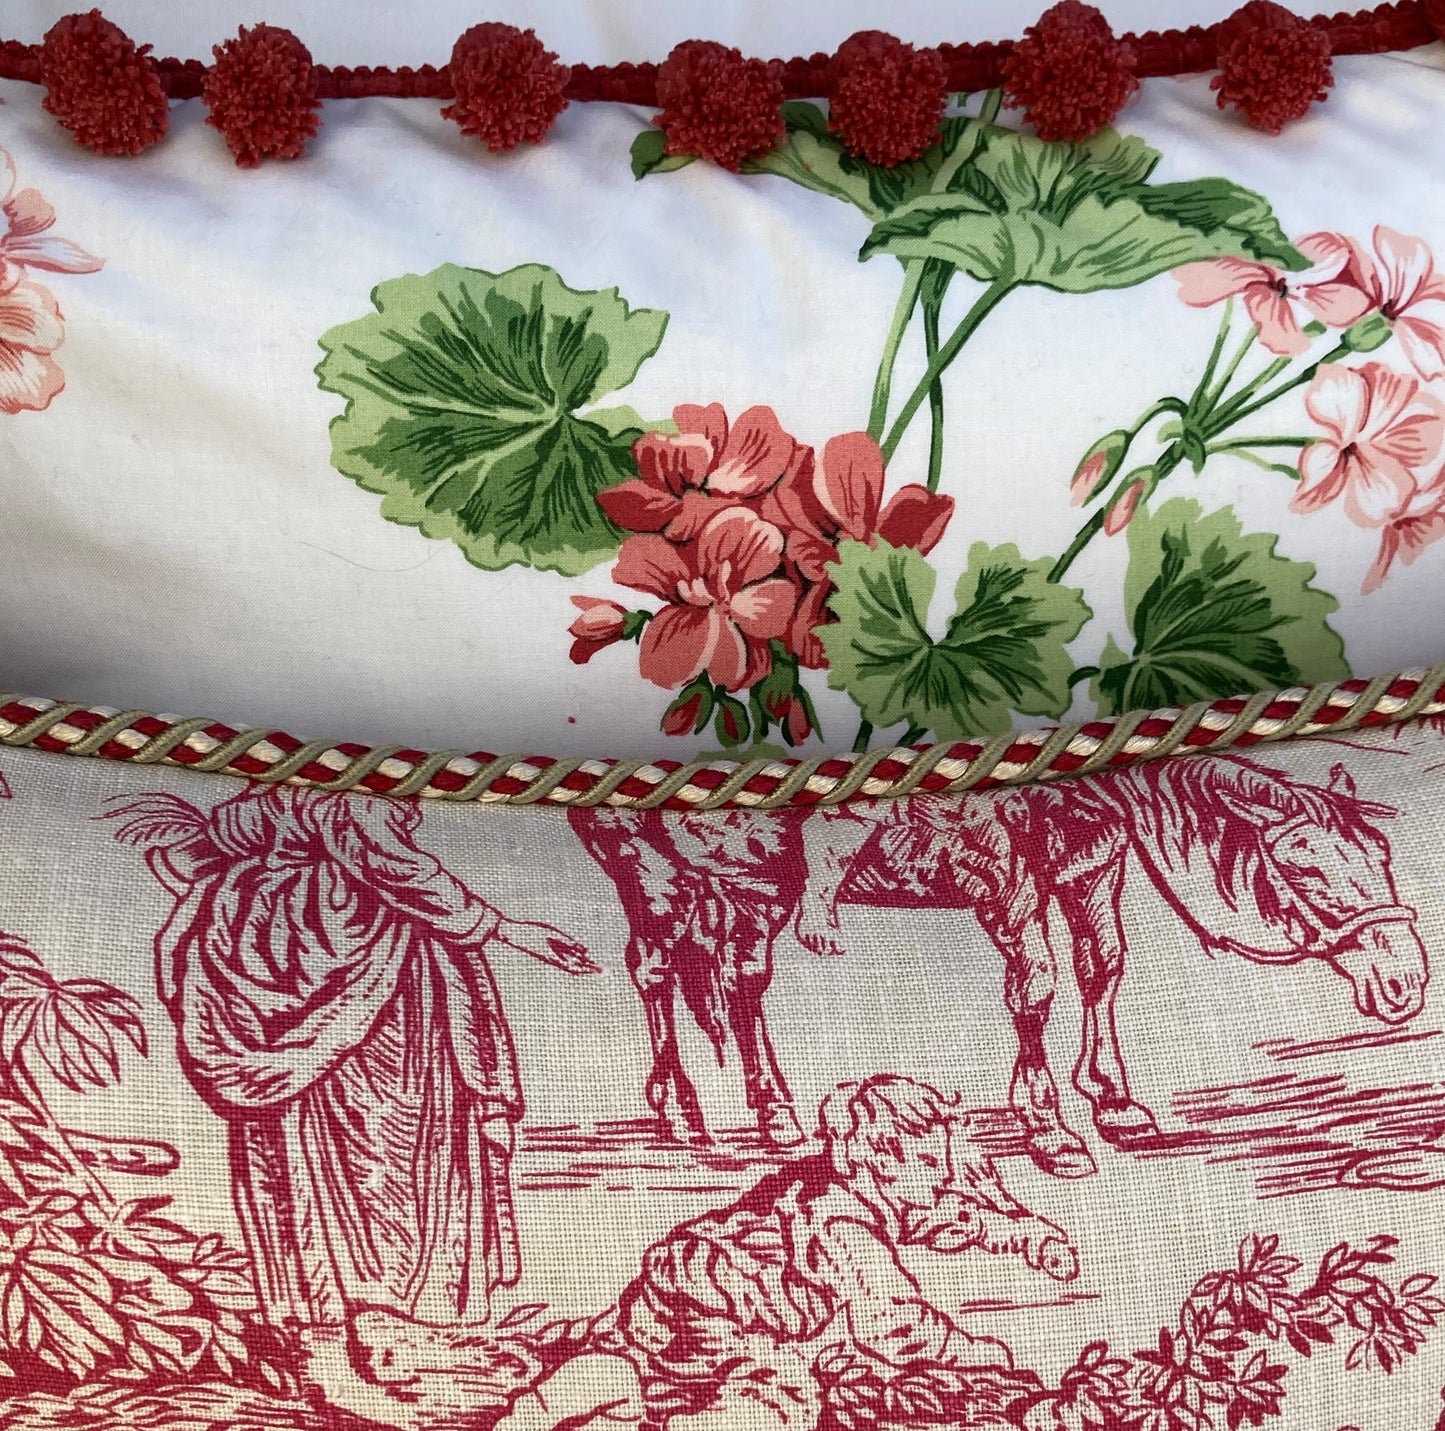 Country Life Hand Printed Red Toile 20x20 Square Pillow Close Up